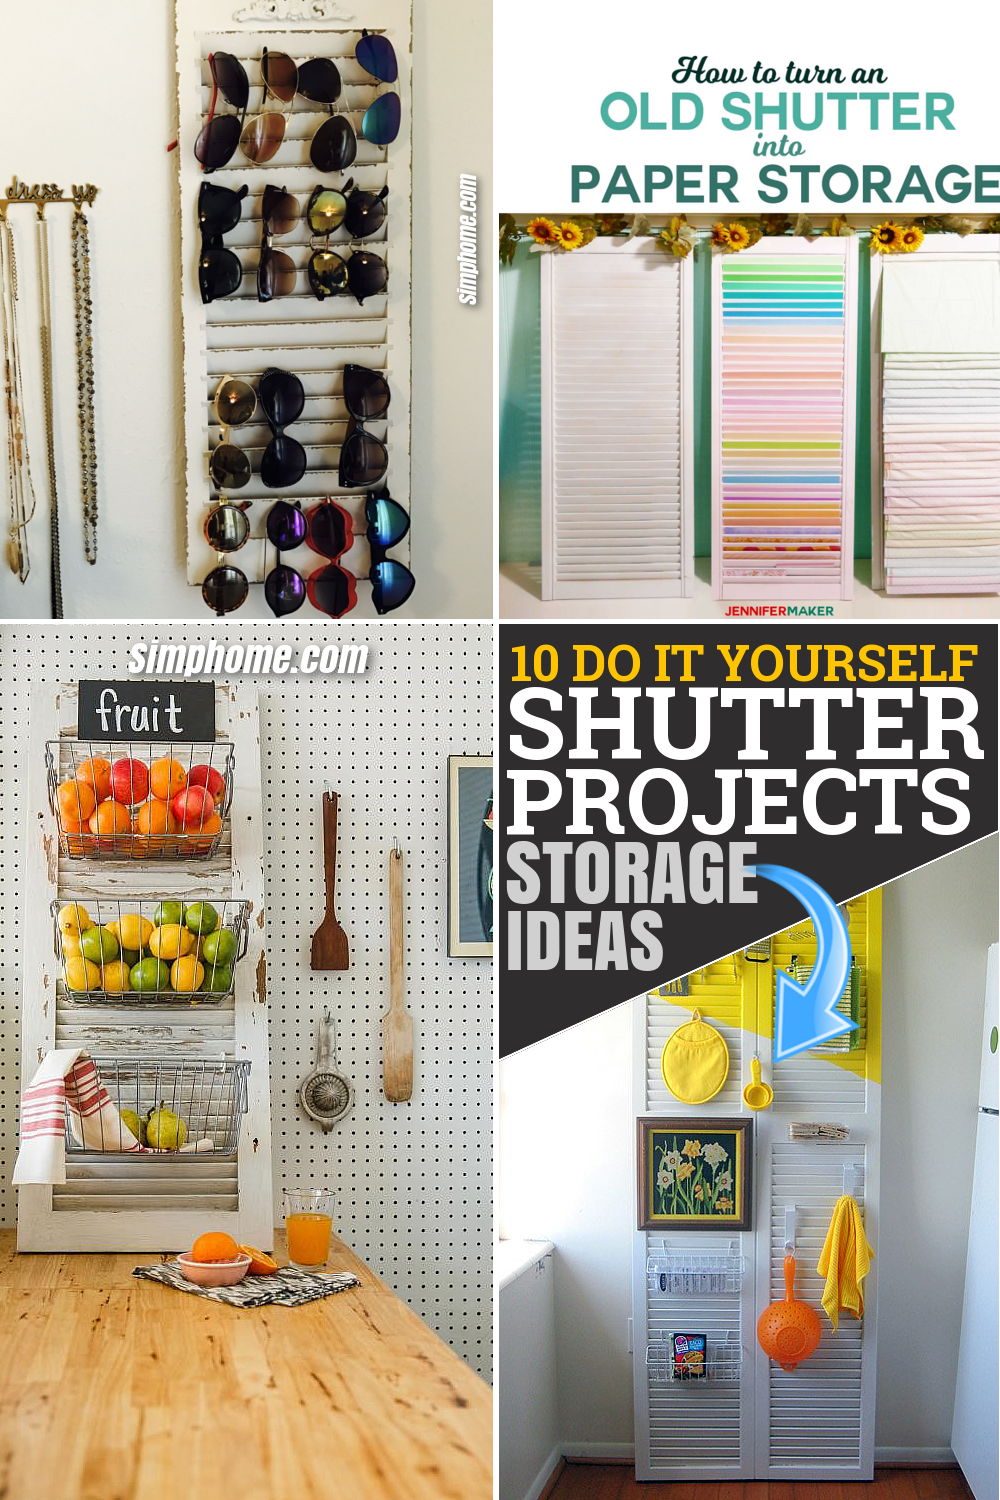 10 DIY Shutter Projects by SIMPHOME.COM That Will Level Up Your Storage Solutions Game Pinterest Featured Image